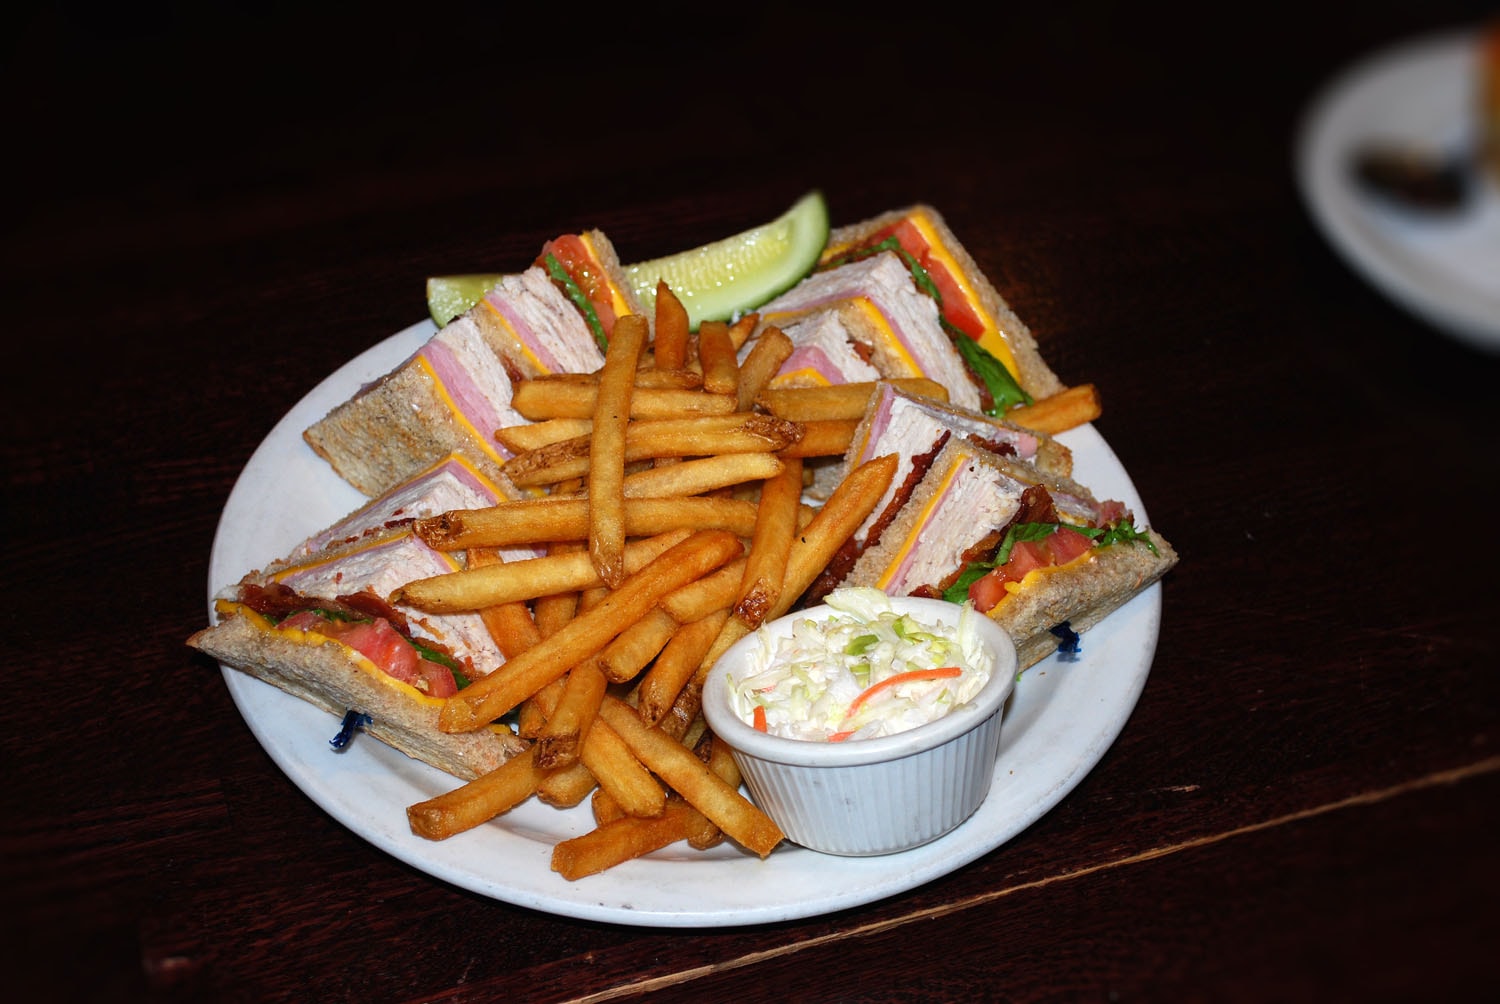 A plate of club sandwich and fries